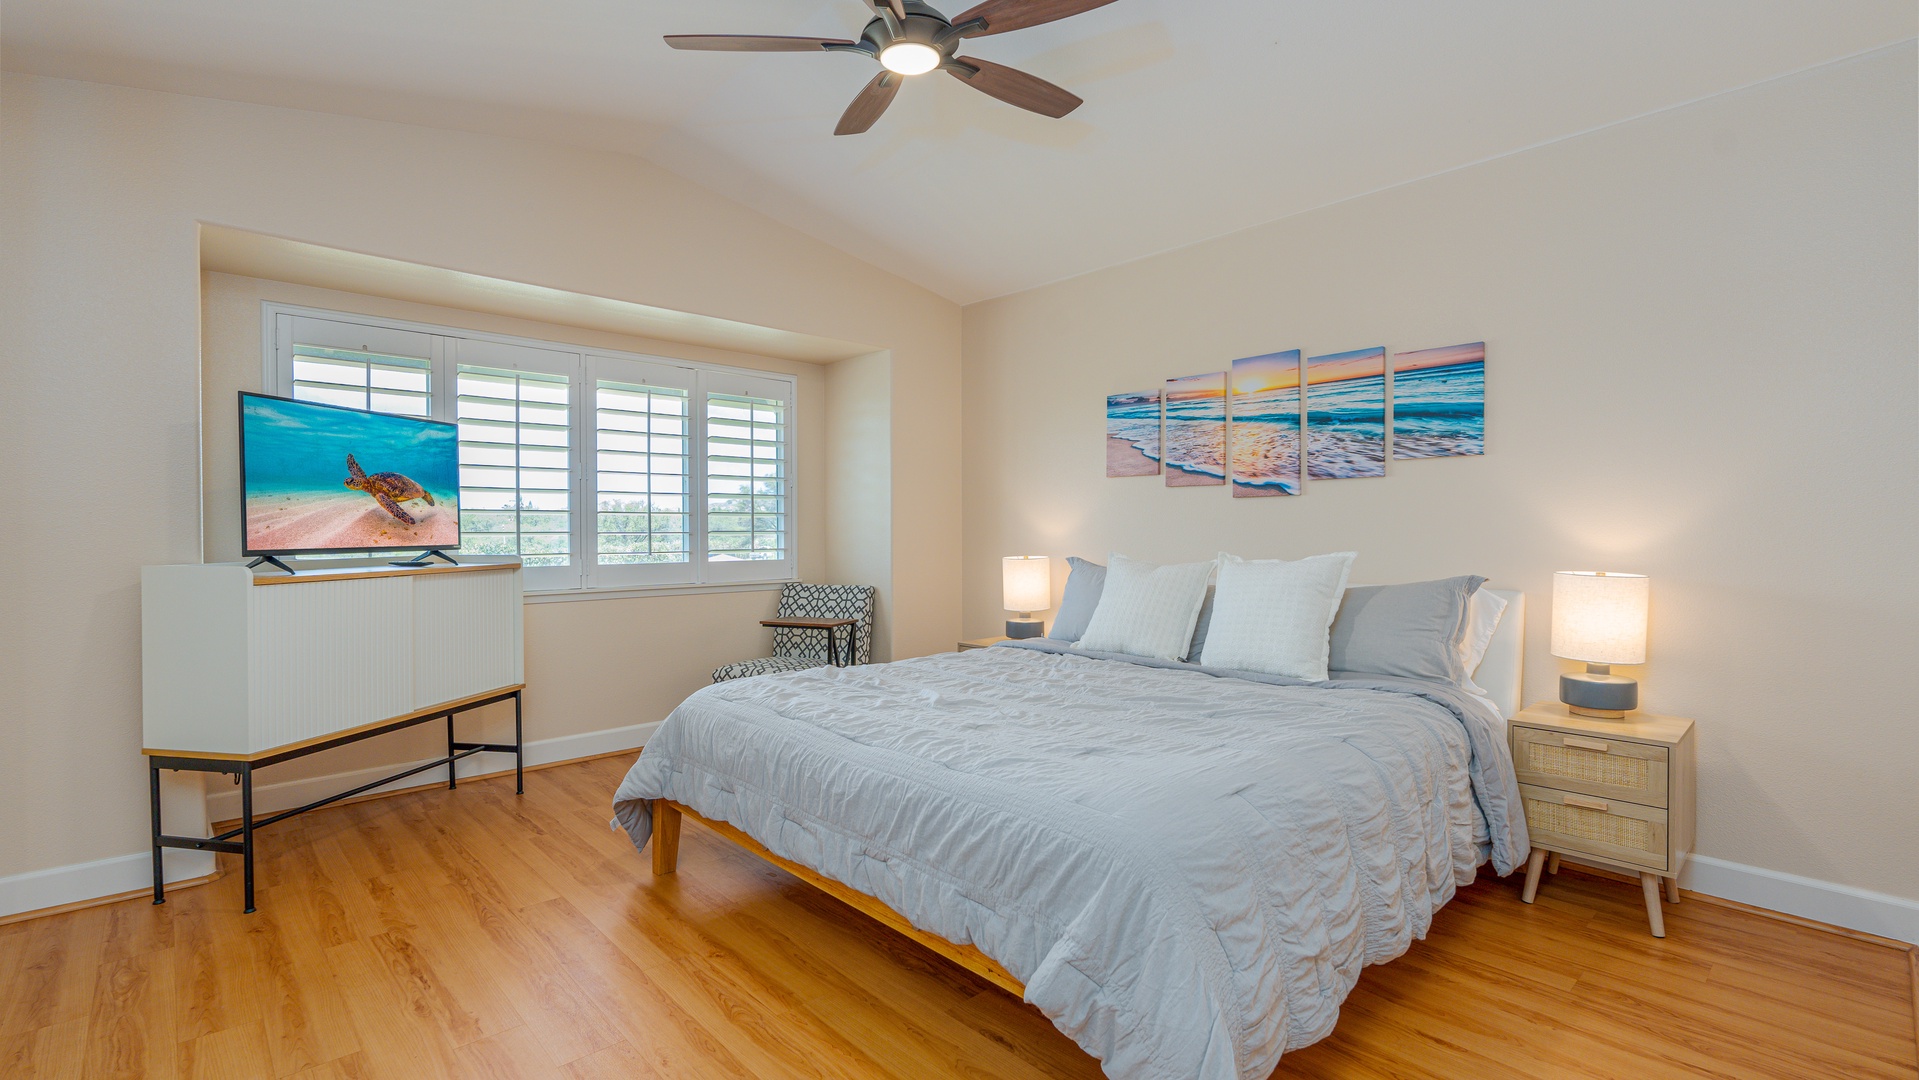 Kapolei Vacation Rentals, Hillside Villas 1496-2 - The primary guest bedroom is comfortable and spacious for a restful slumber.